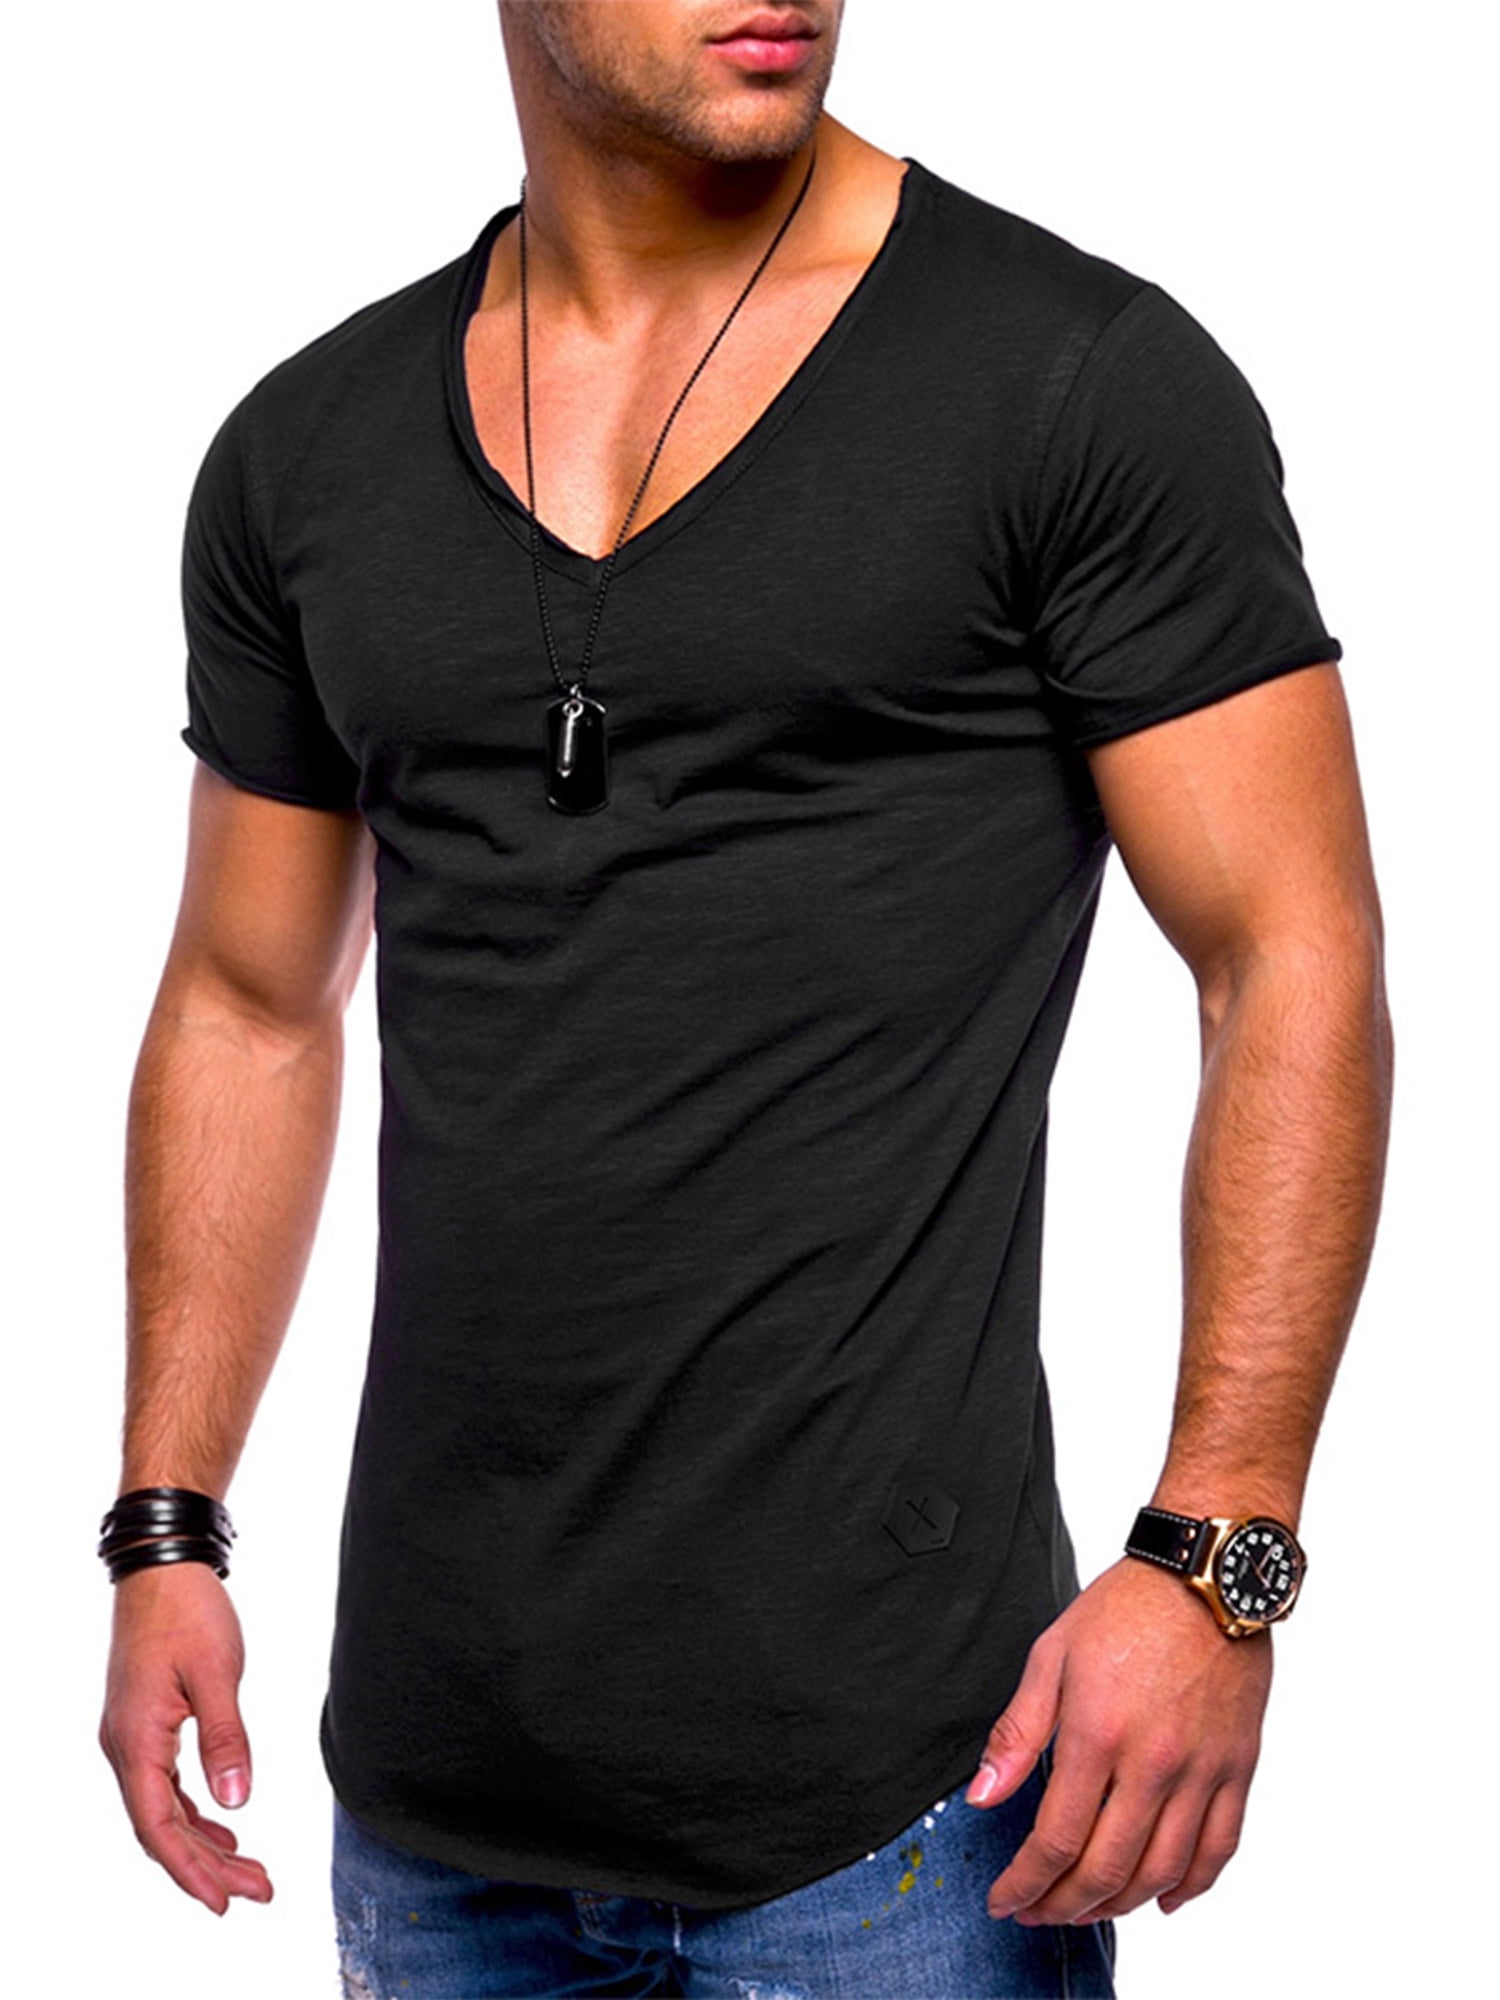 Avamo Mens Casual Solid Color T-Shirt Stretch Muscle T Shirts Short ...